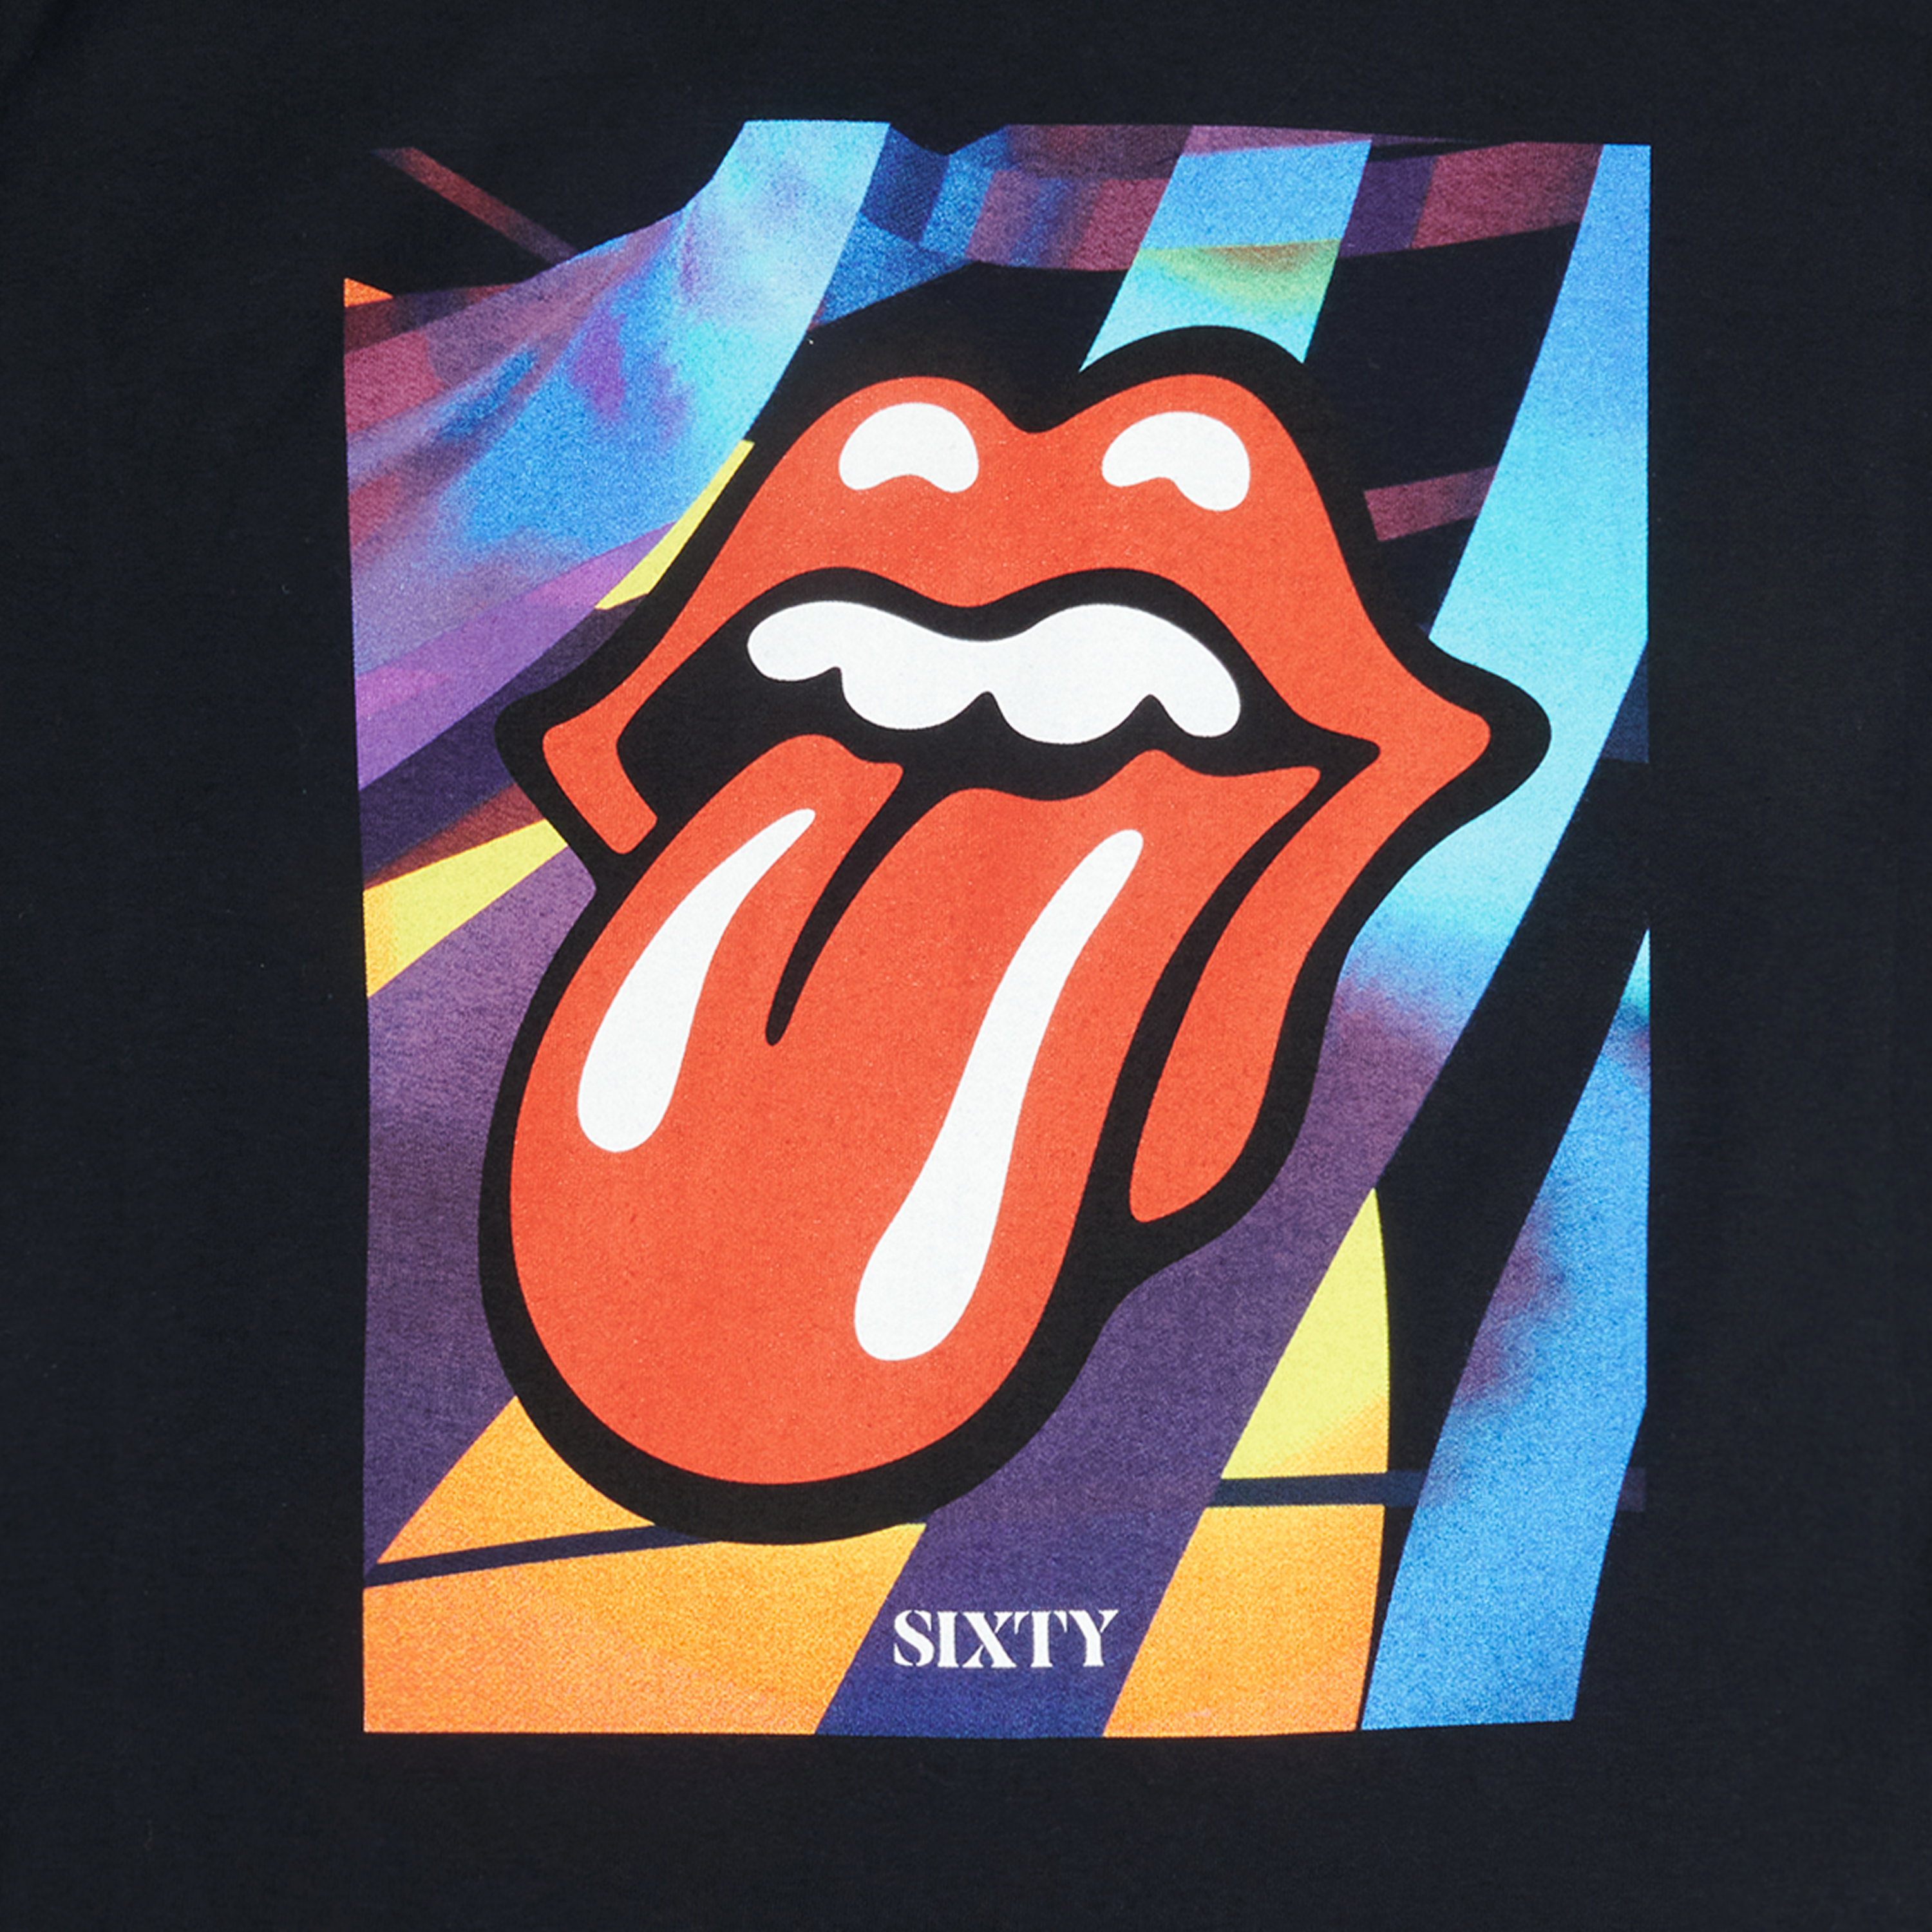 The Rolling Stones - Sixty Box Graphic Europe Tour T-Shirt